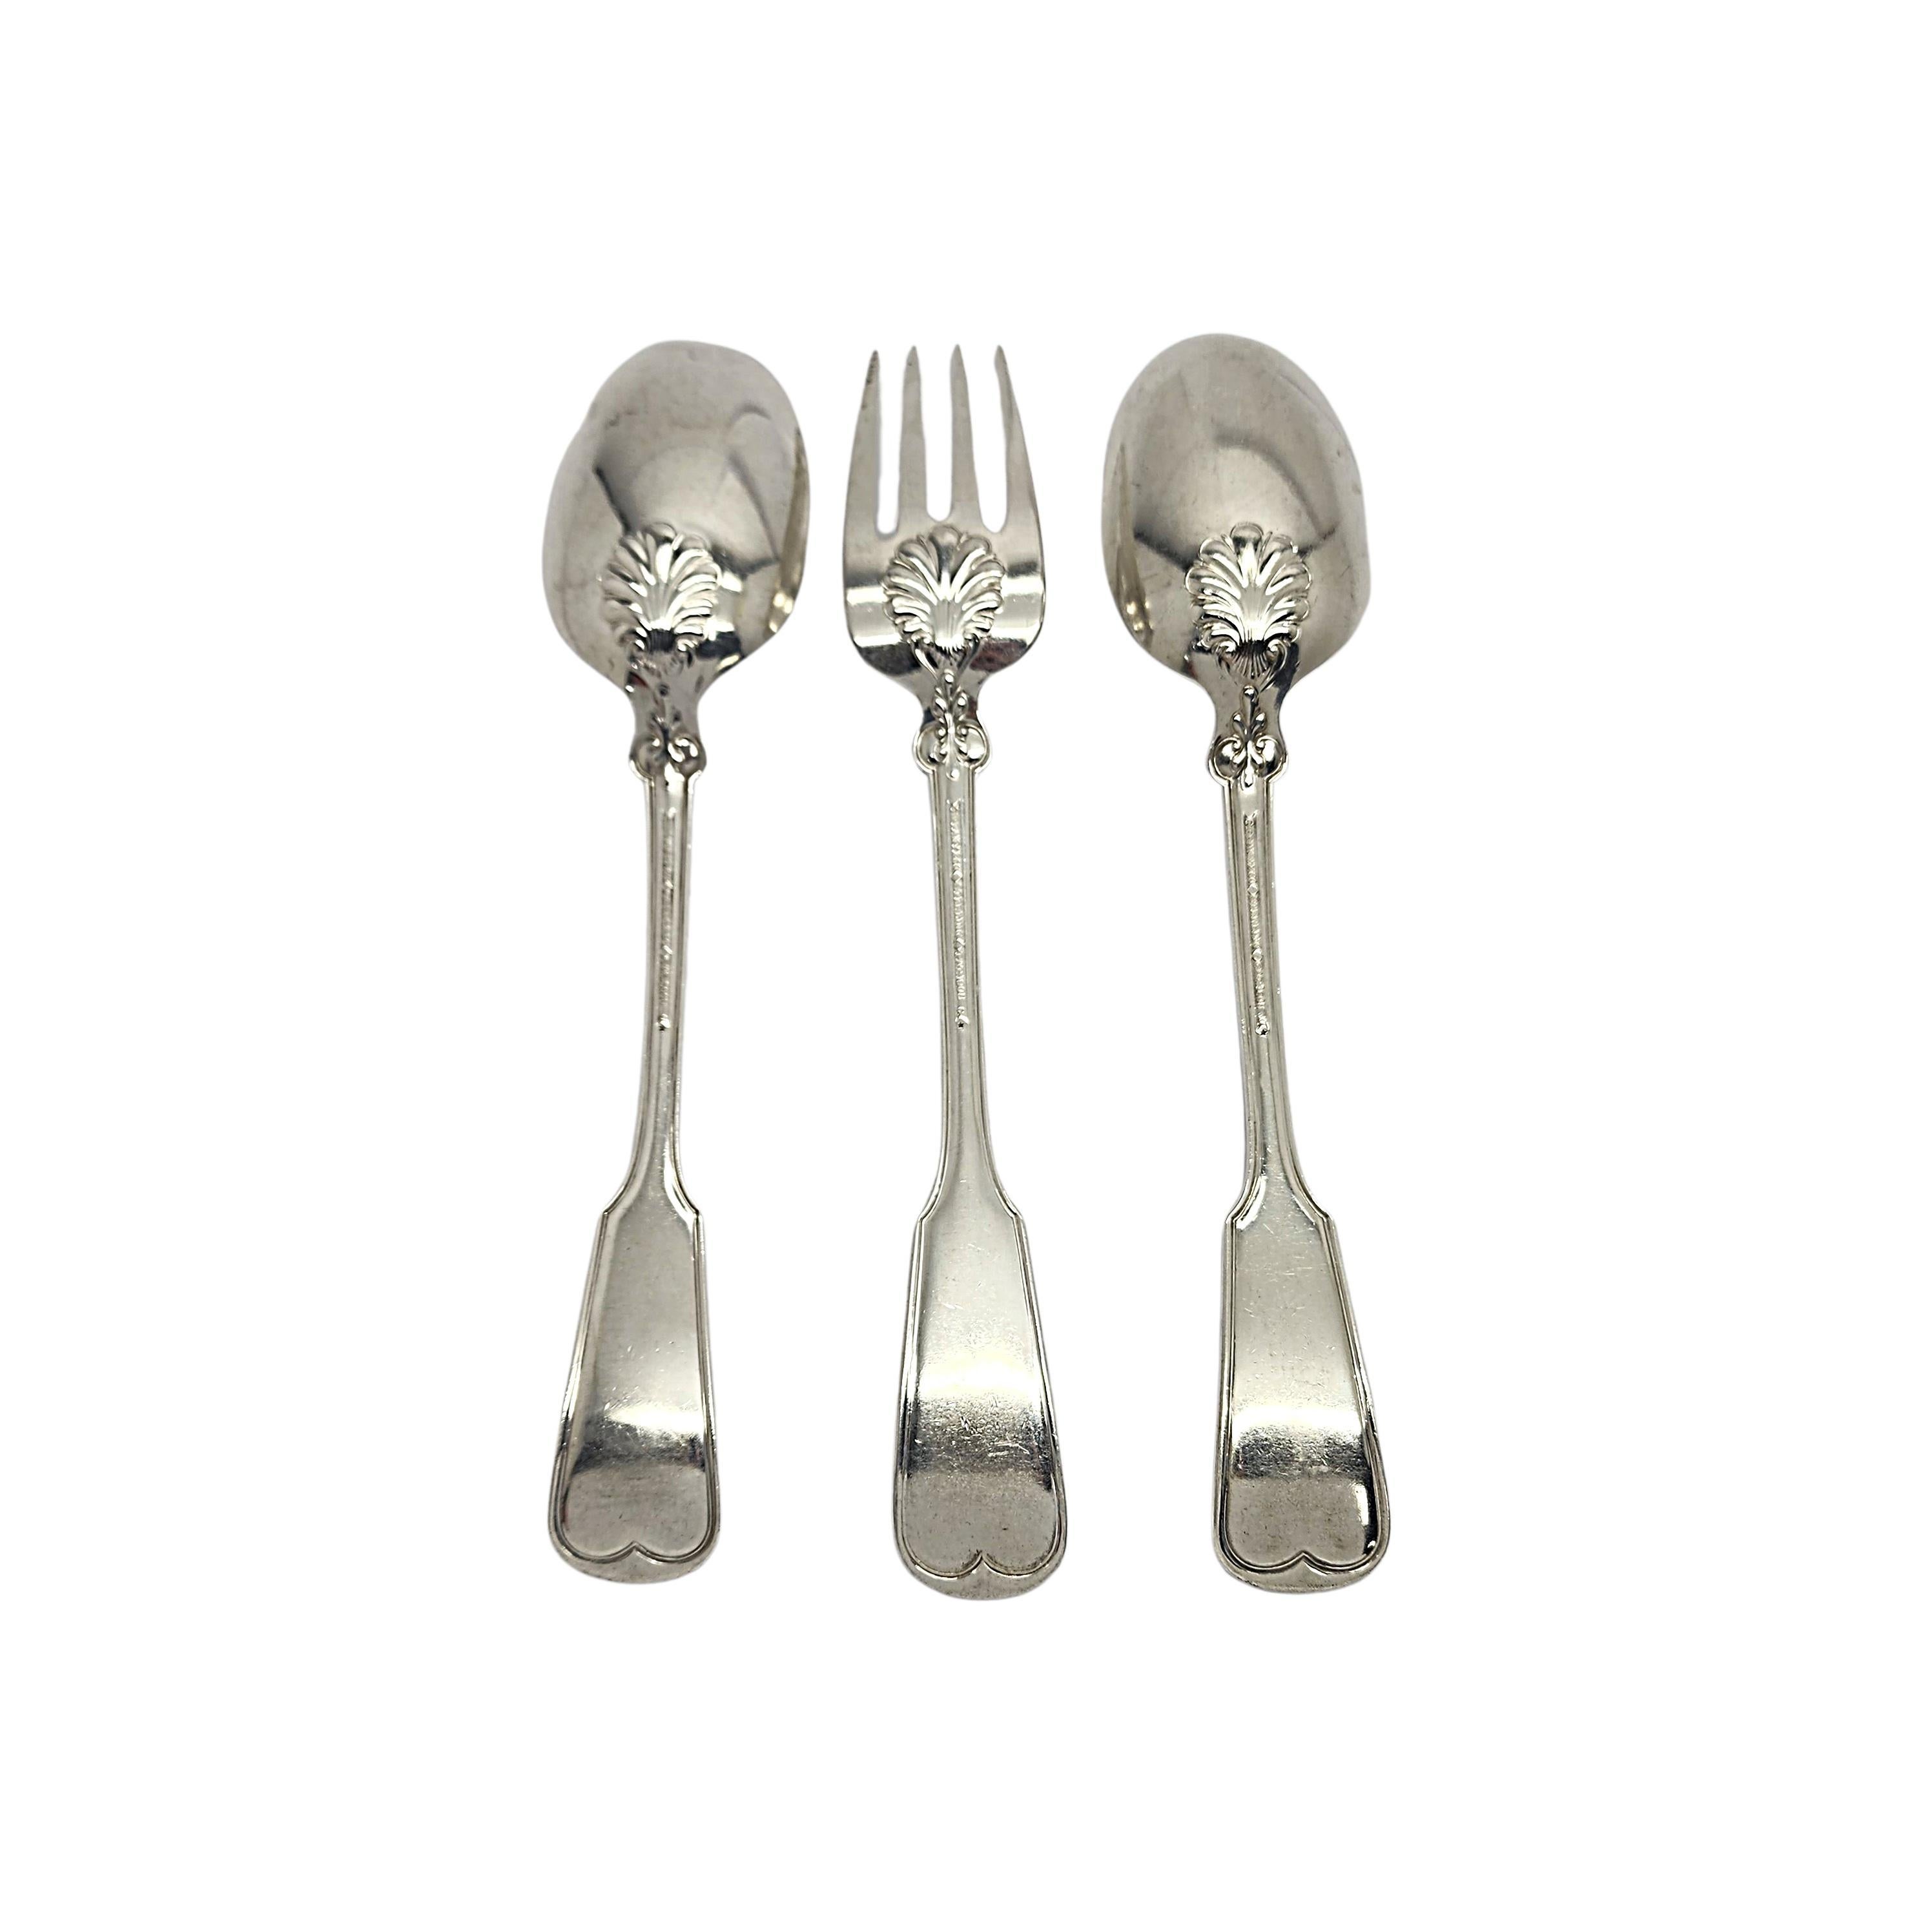 Set of 3 Tiffany & Co sterling silver serving spoons and fork in the Shell & Thread pattern by Tiffany & Co with monogram.

Monogram appears to be EWE

Two serving spoons and 1 serving fork in the Shell & Thread pattern which was introduced in 1905